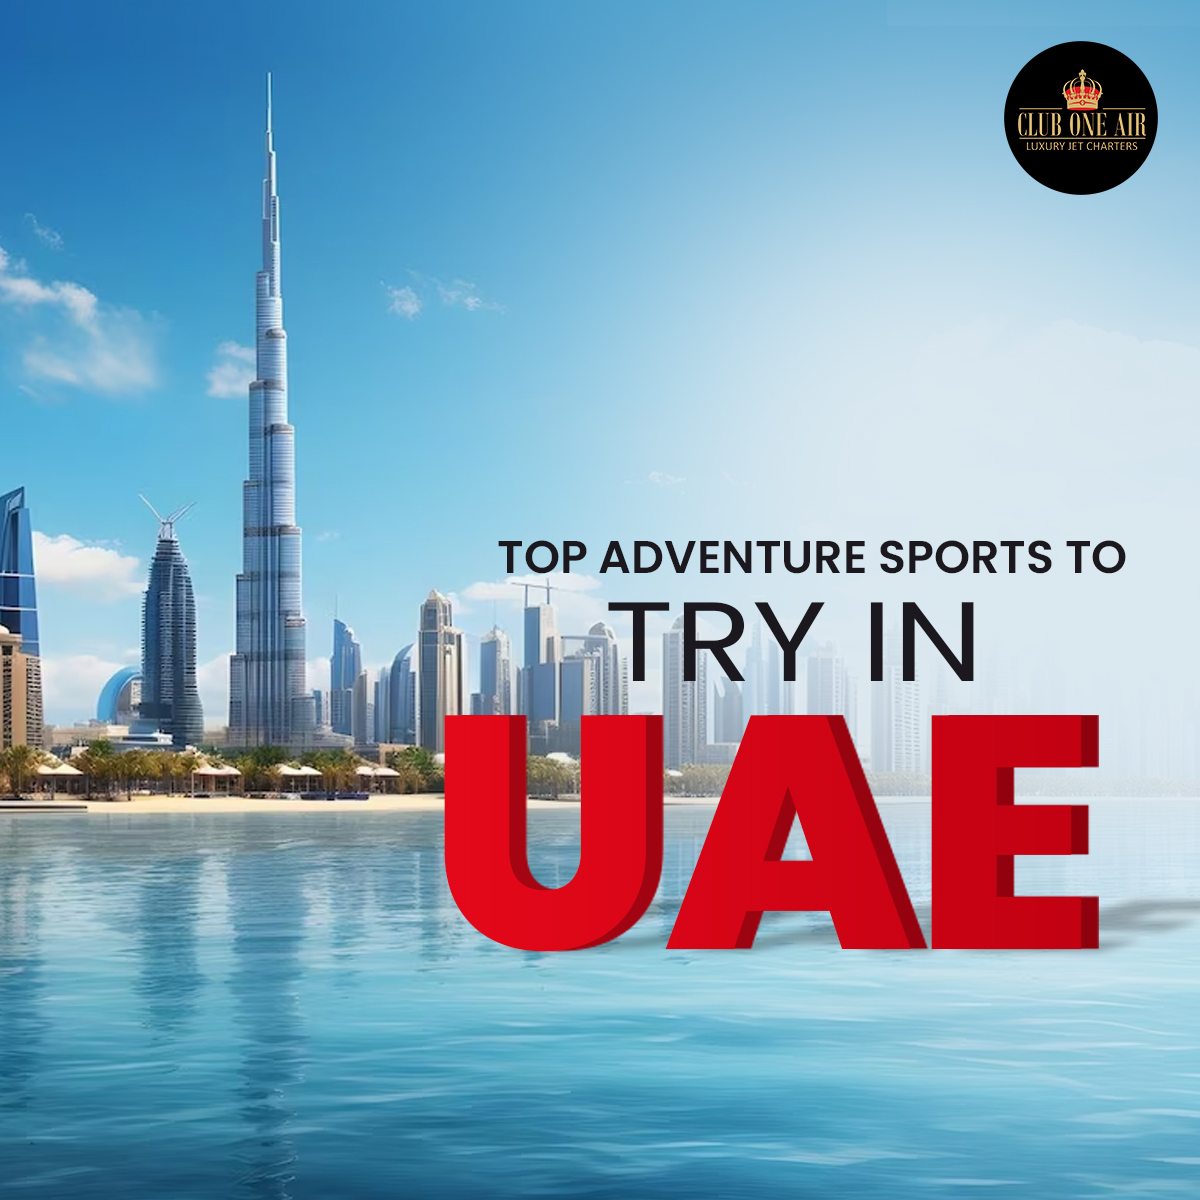 Unveil the thrilling adventure sports of the #UAE! 🏜️✈️ From desert dune bashing to water sports, dive into the adrenaline rush! bit.ly/3TnhqHr

#UAESports #AdventureAwaits #ClubOneAir #LuxuryCharterPlanes #CharterPlanes  #CharterServices #Aviation #Travel #TravelUAE